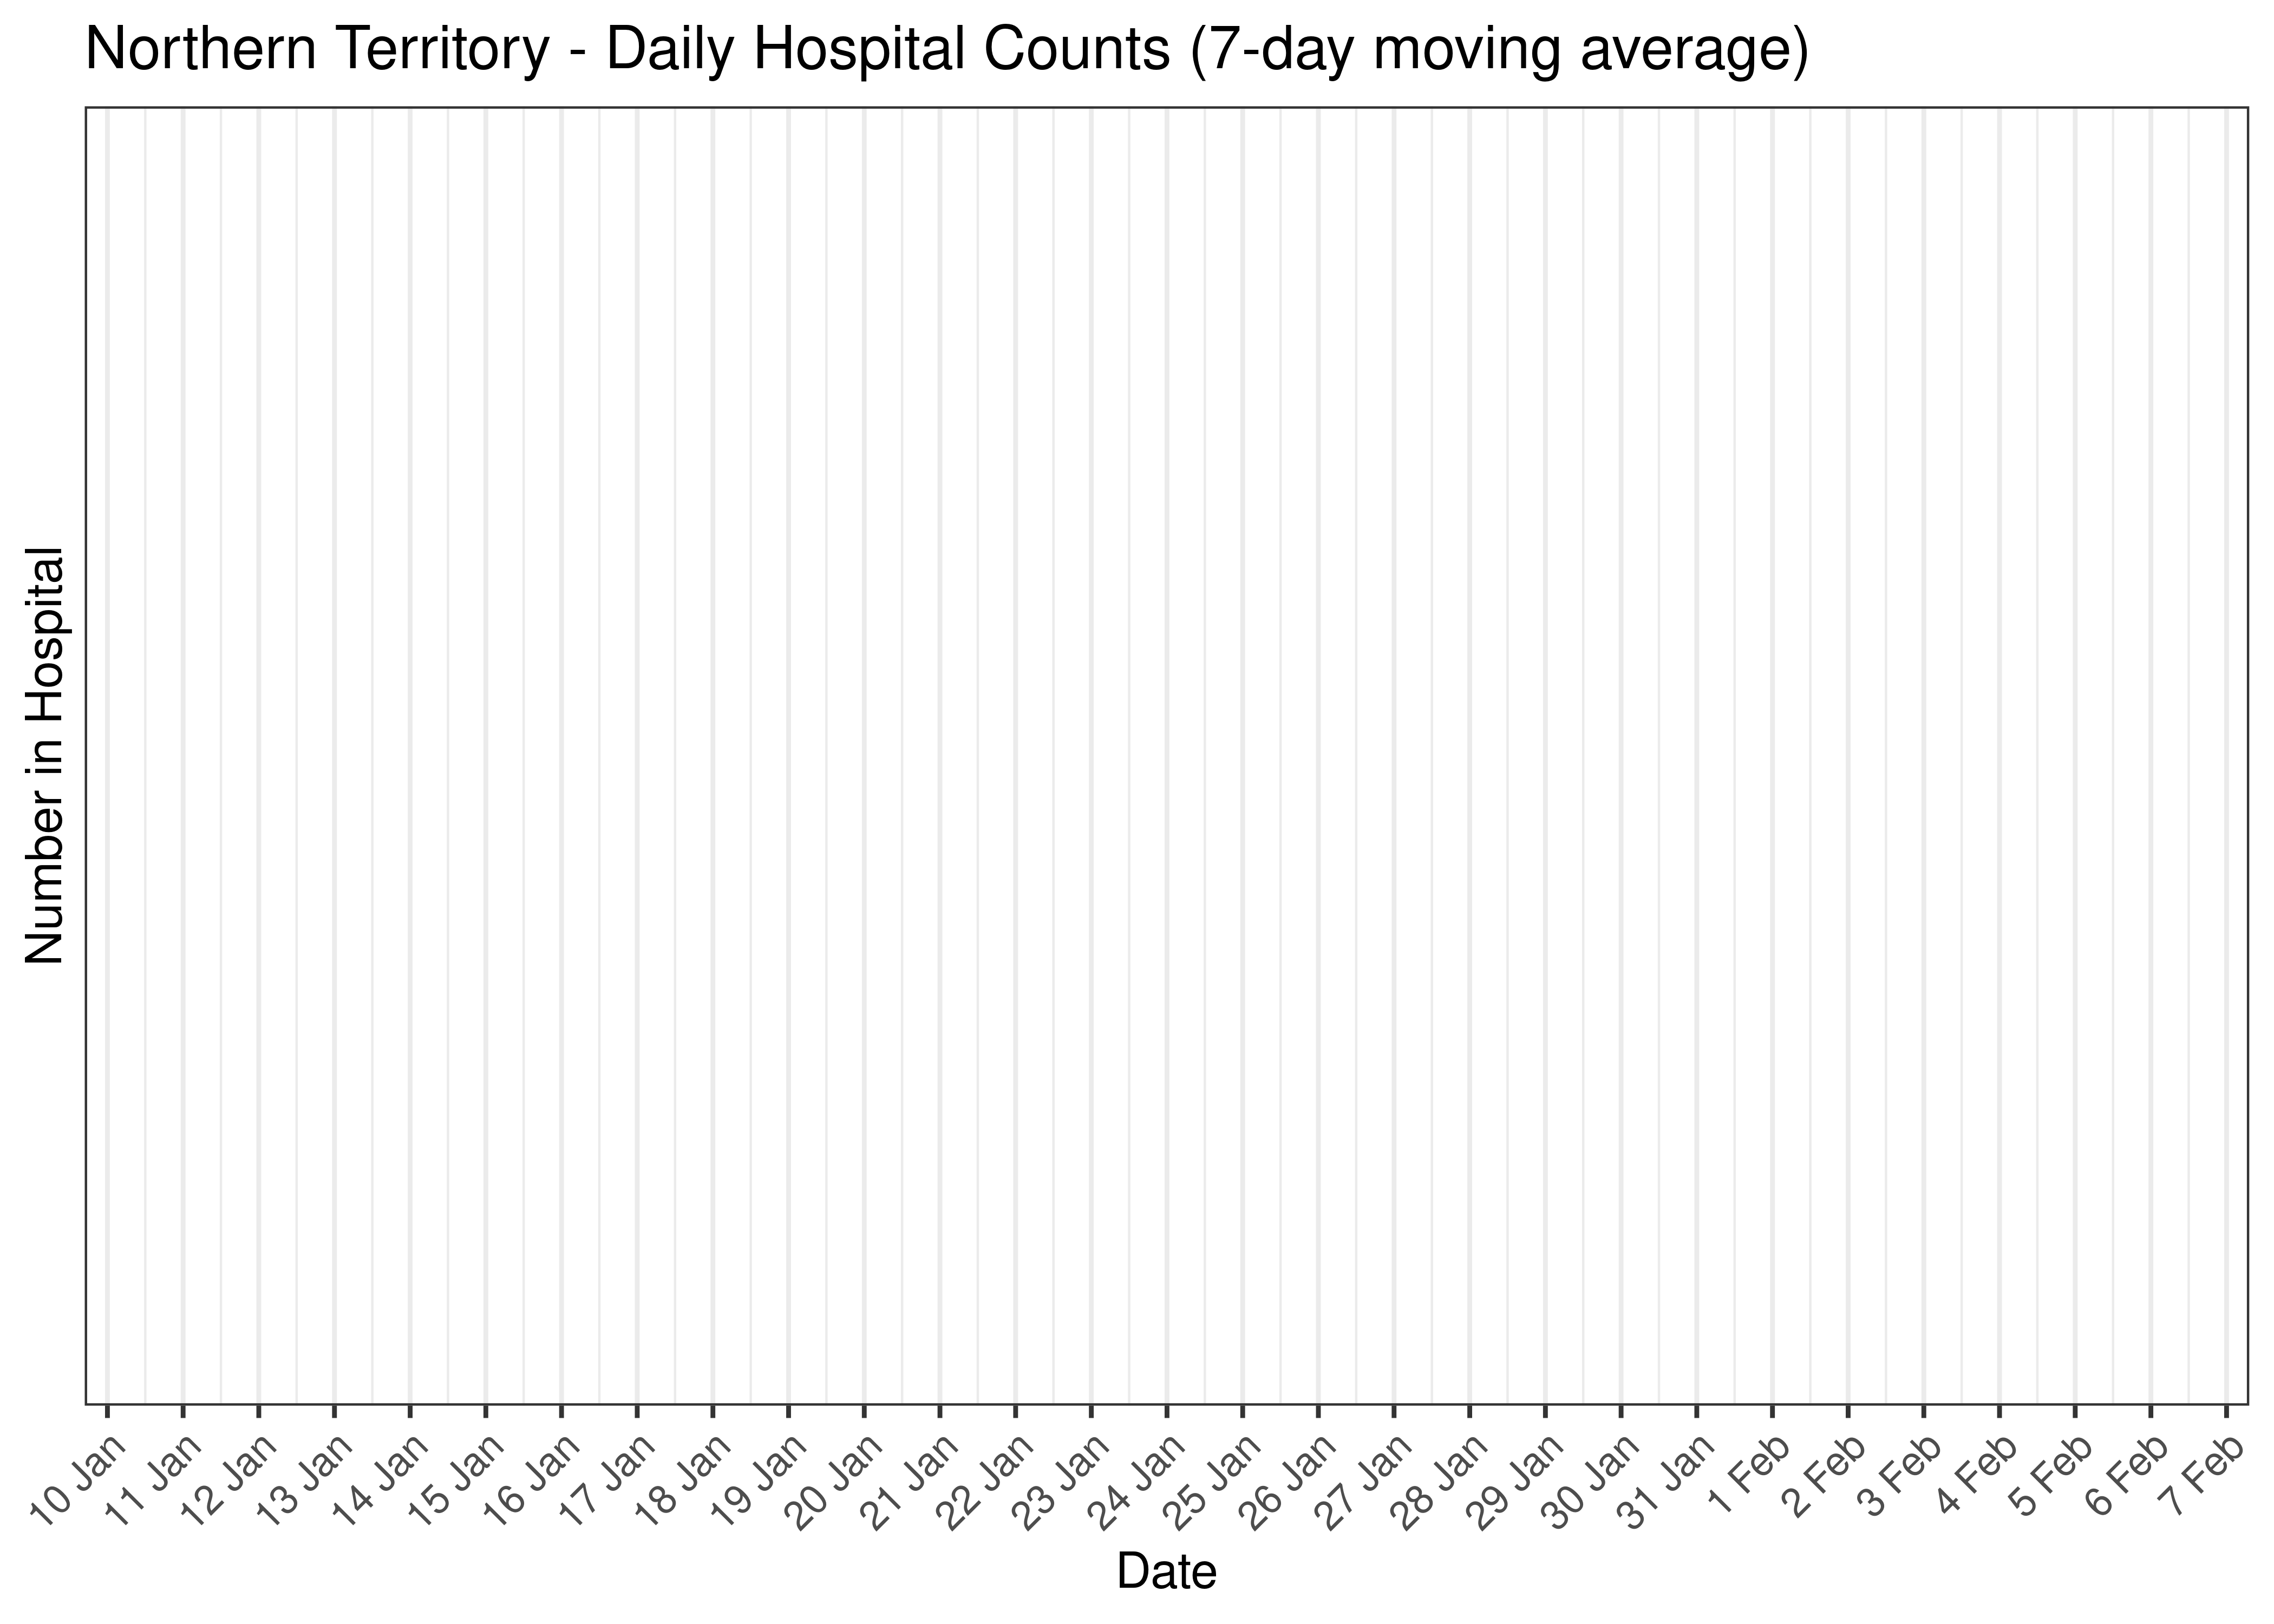 Northern Territory - Percentage Testing Positive for Last 30 Days (7-day moving average)